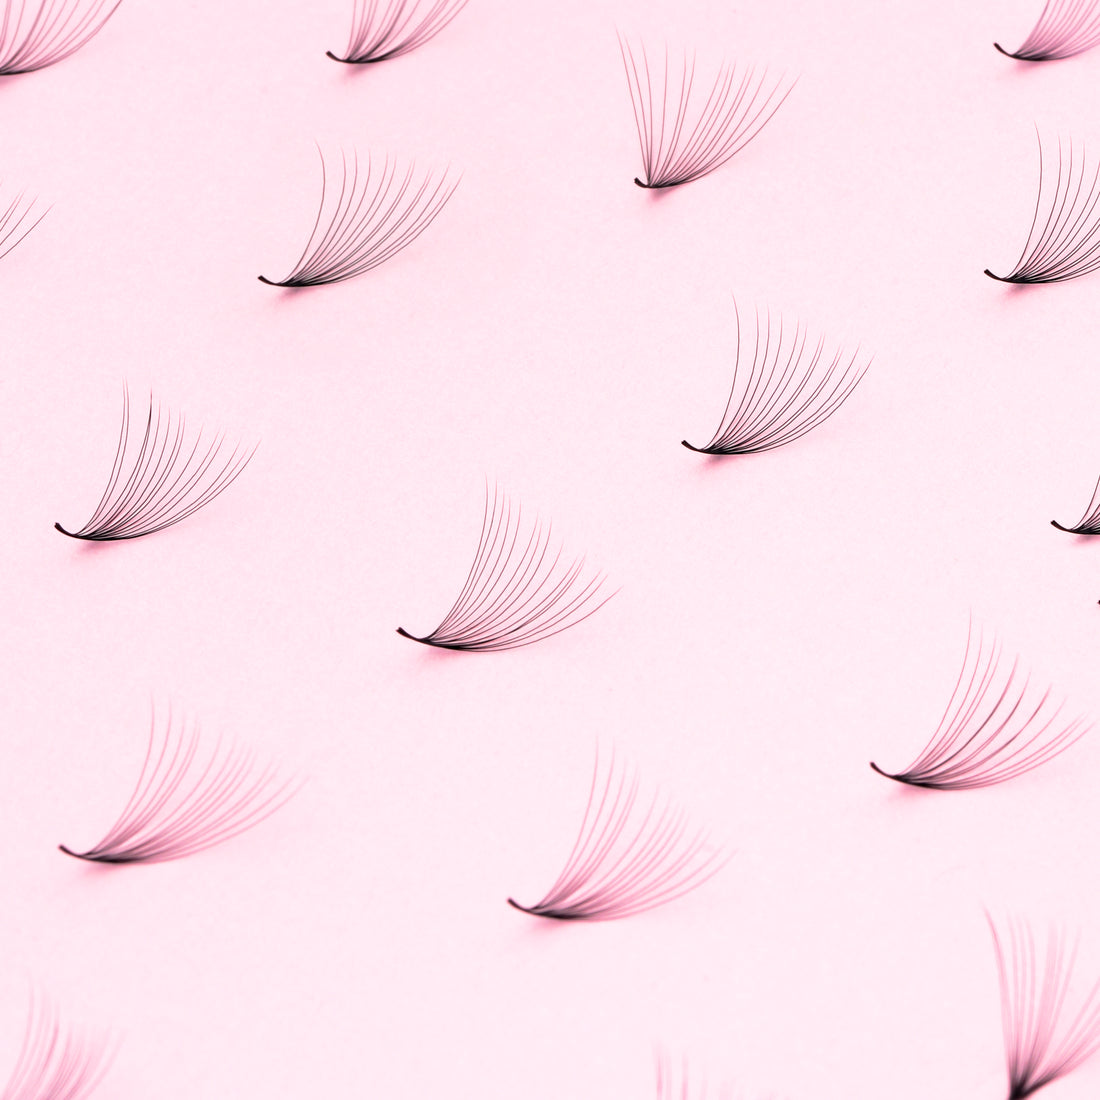 Hybrid Lashes vs. Volume: What Every Lash Tech Needs to Know